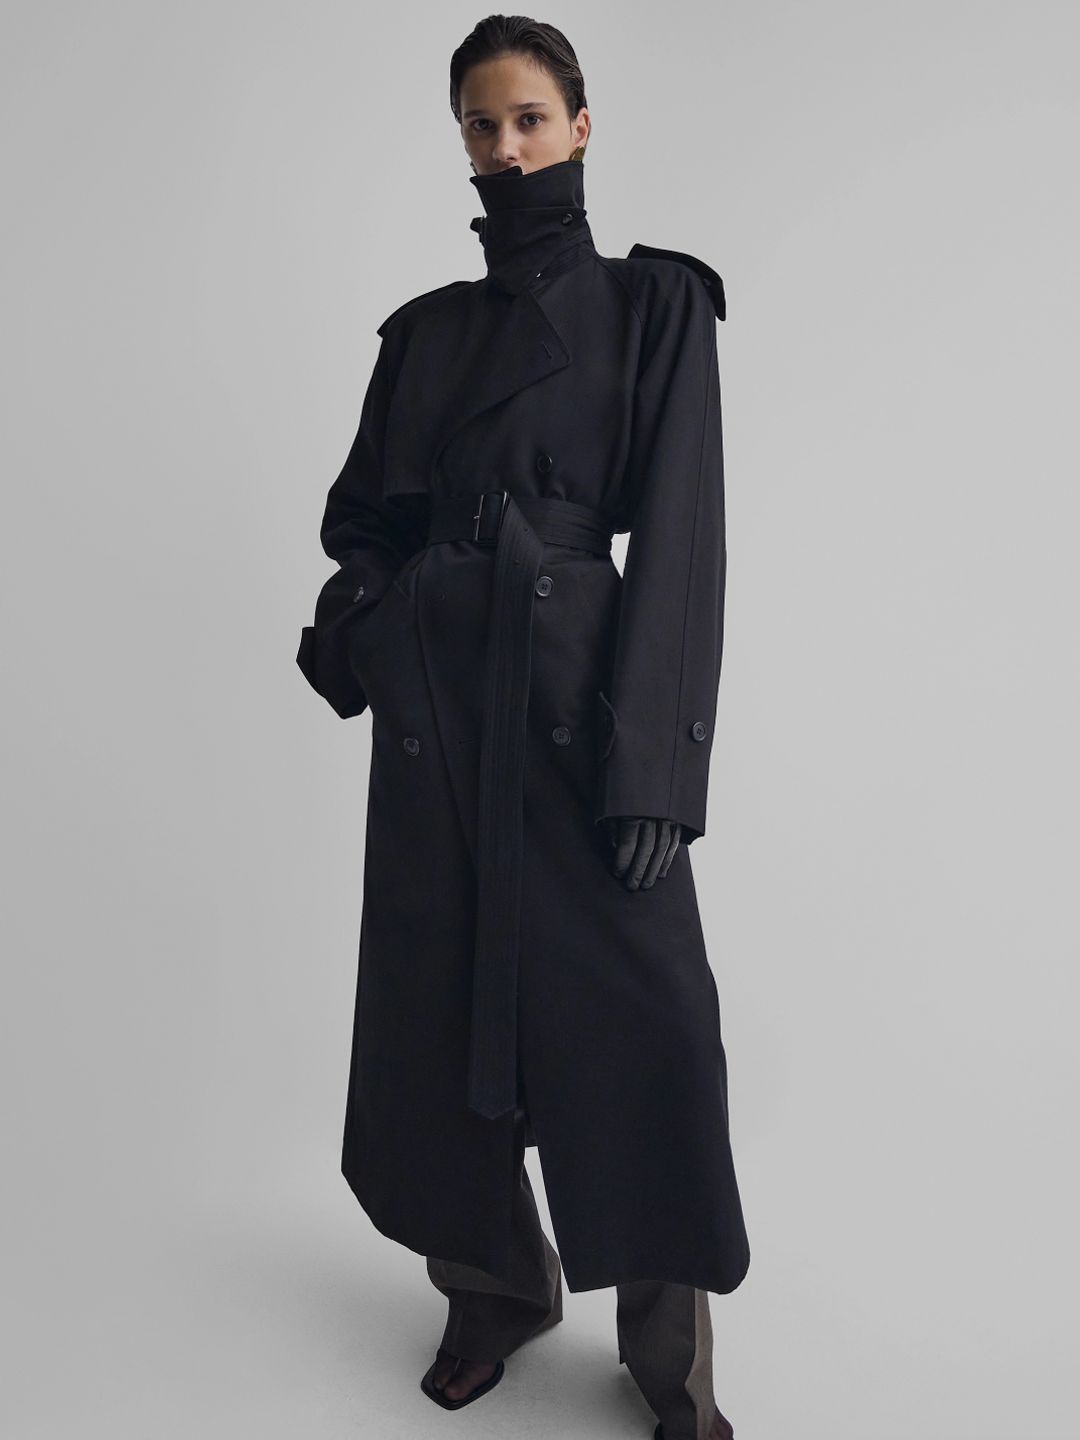 Long Trench Coat In Black Cotton Drill - Phoebe Philo